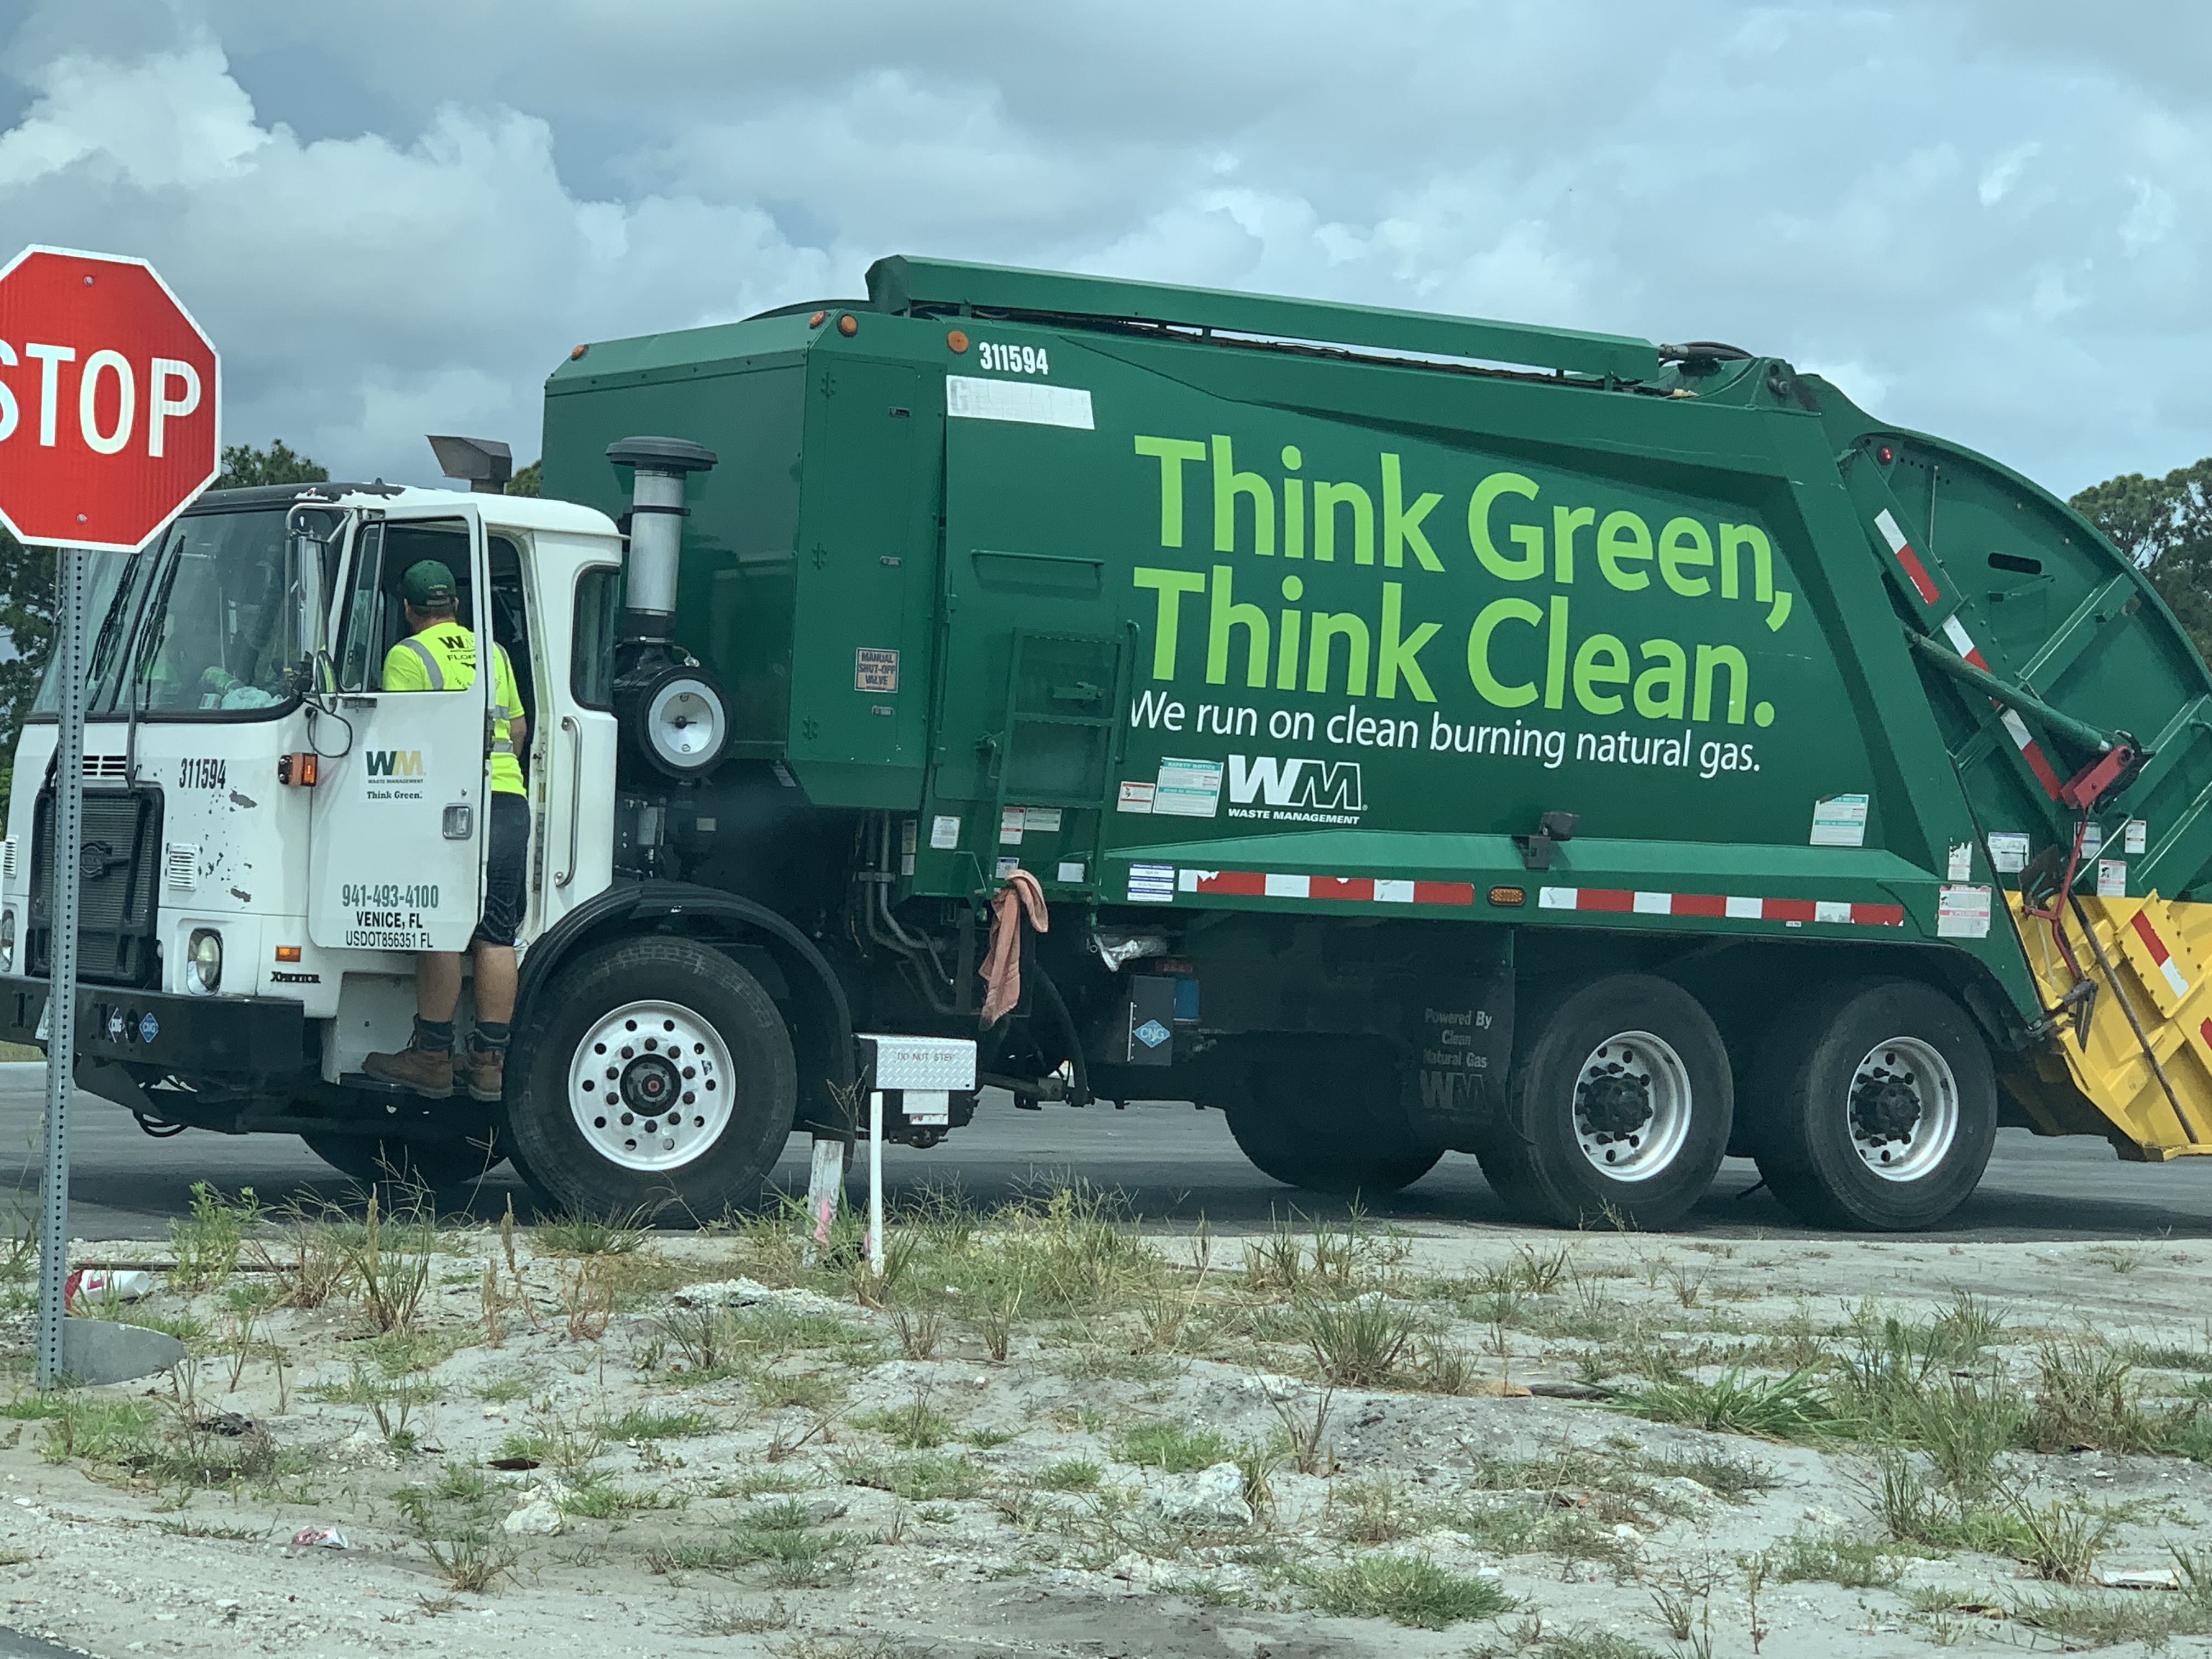 A garbage truck is parked on the side of the road.